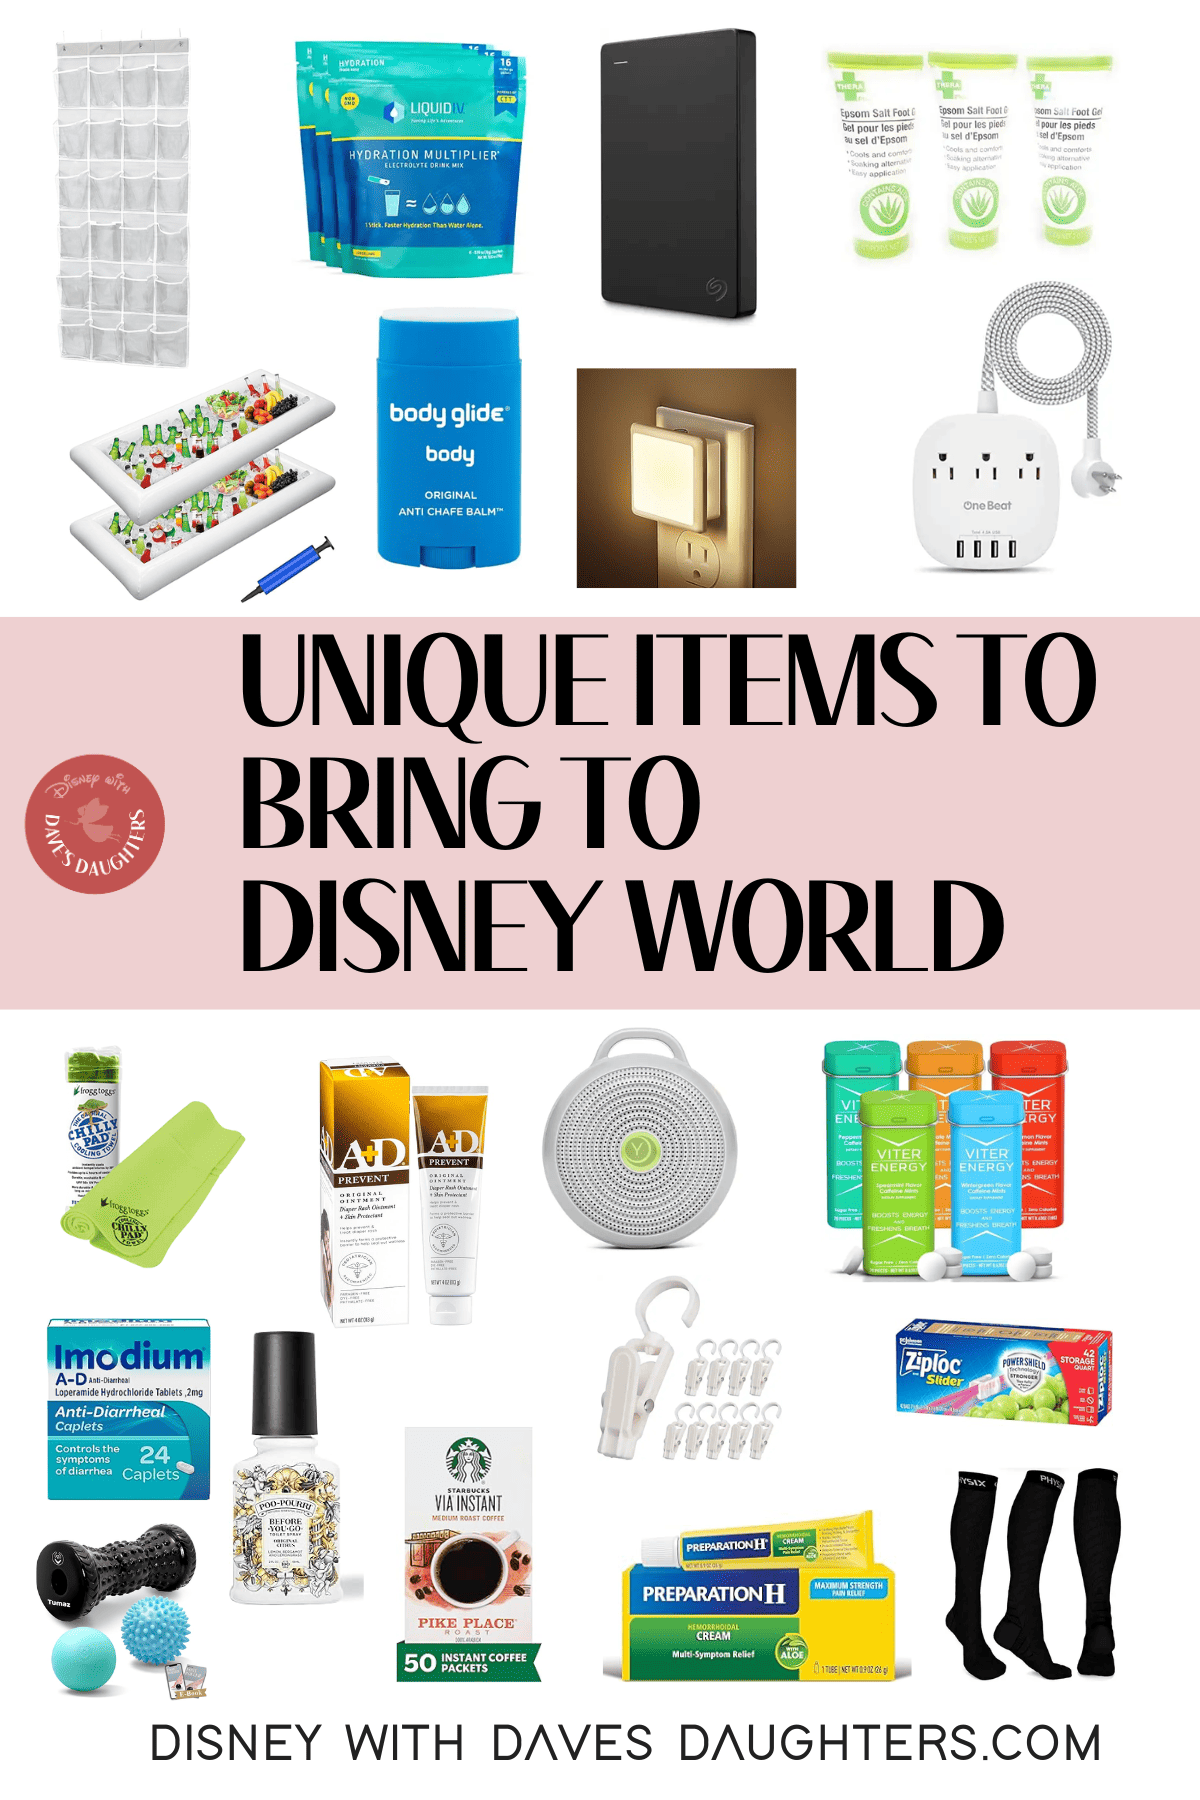 Unique items to bring to Disney World